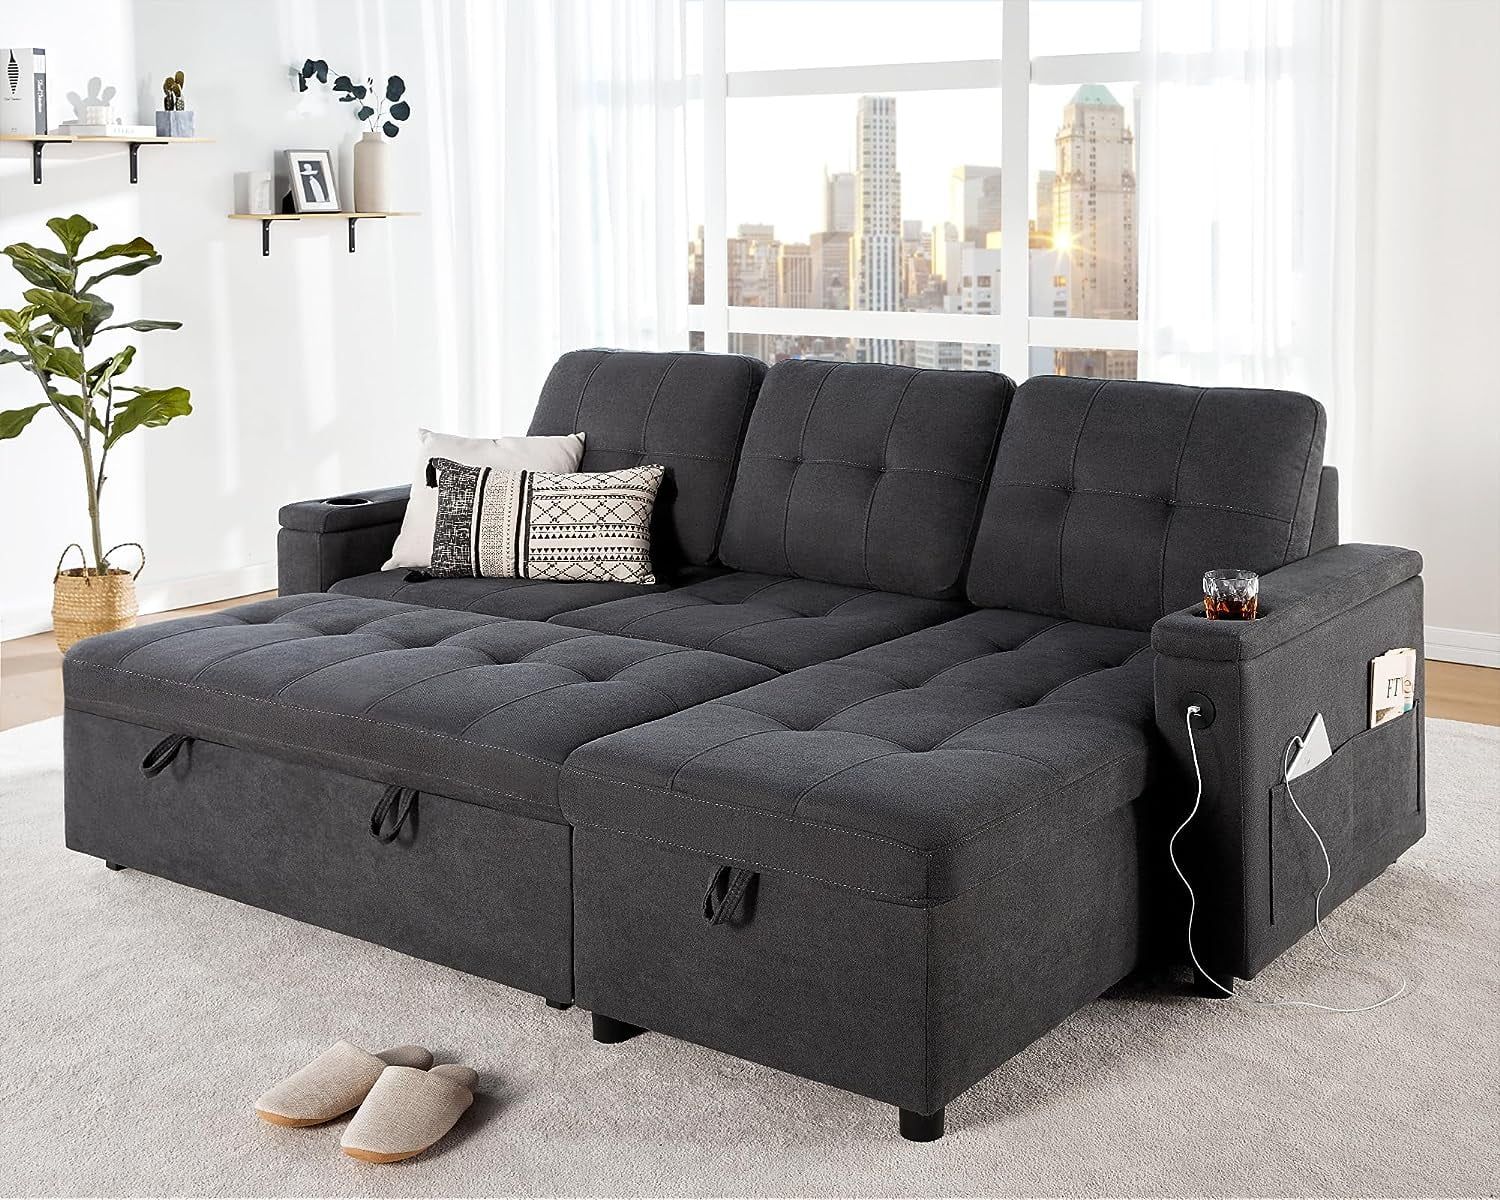 Papajet Sleeper Sofa, Modern Tufted Convertible Sofa Bed, Usb Charging  Ports & Cup Holders, L Shaped Sofa Couch With Storage Chaise, Linen Couches  For Living Room (dark Grey) – Walmart Throughout Tufted Convertible Sleeper Sofas (View 4 of 15)